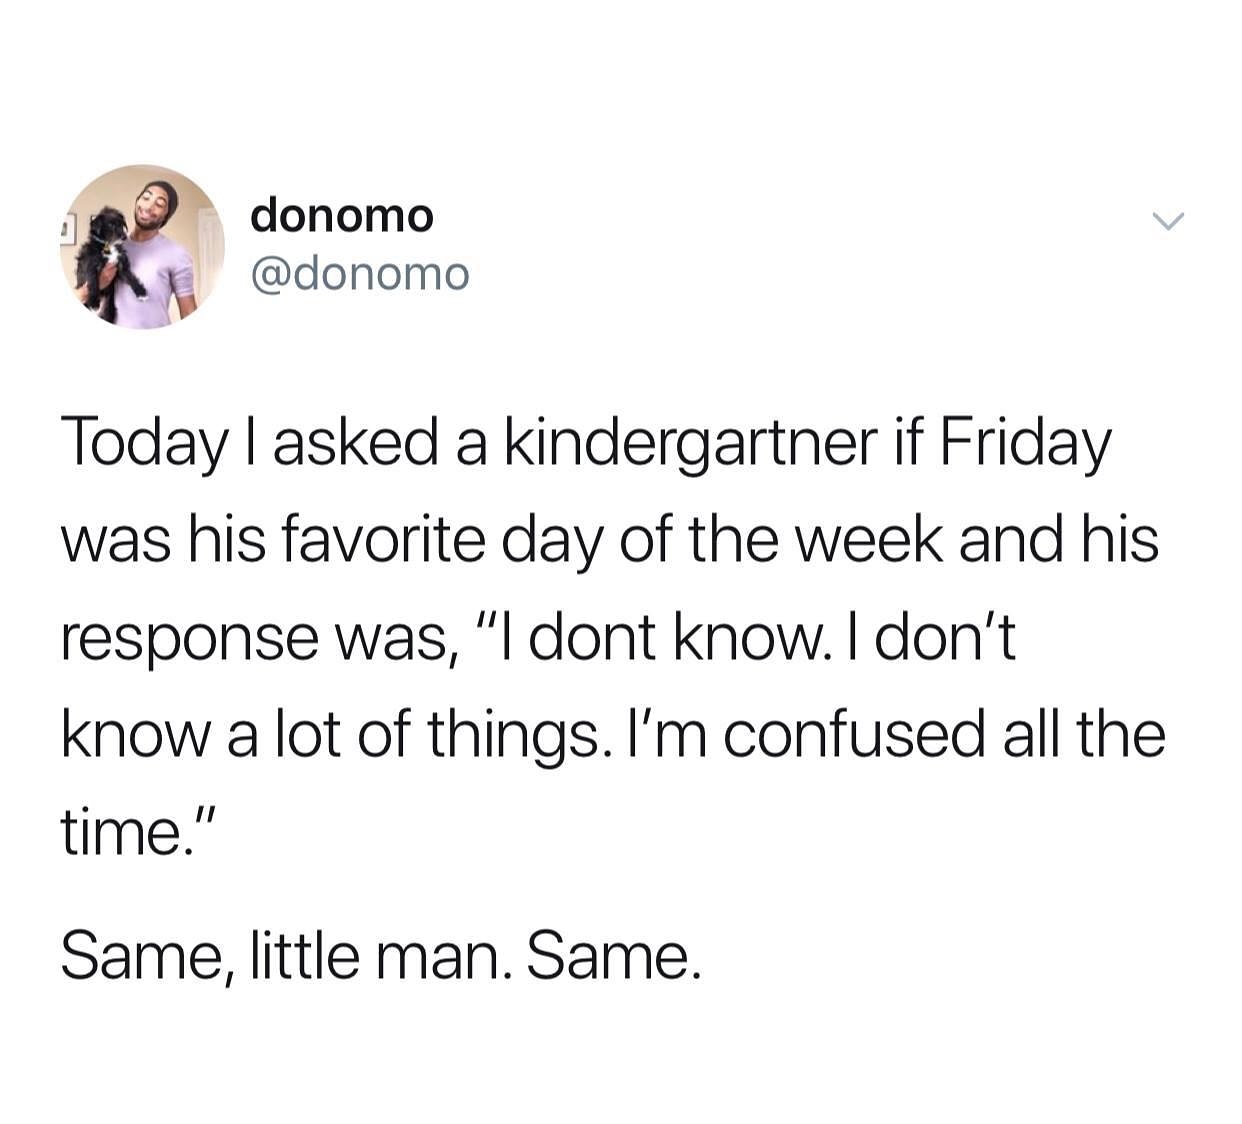 tracy shapoff tweets - donomo Today I asked a kindergartner if Friday was his favorite day of the week and his response was, "I dont know. I don't know a lot of things. I'm confused all the time." Same, little man. Same.